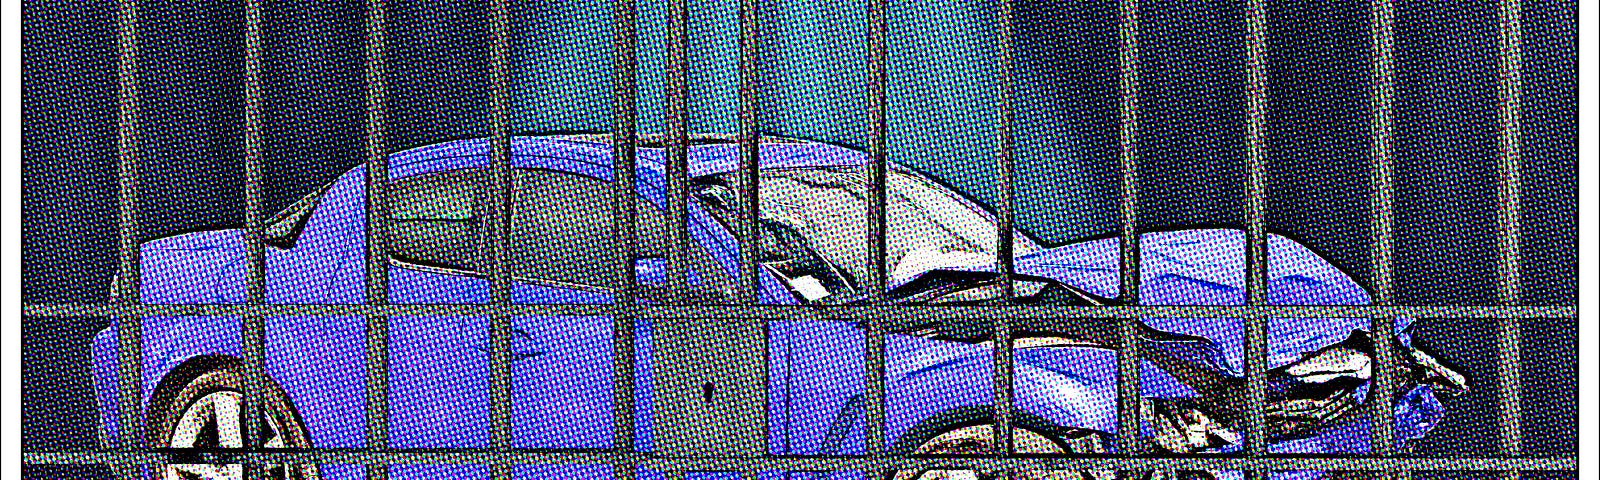 Wrecked car in jail.